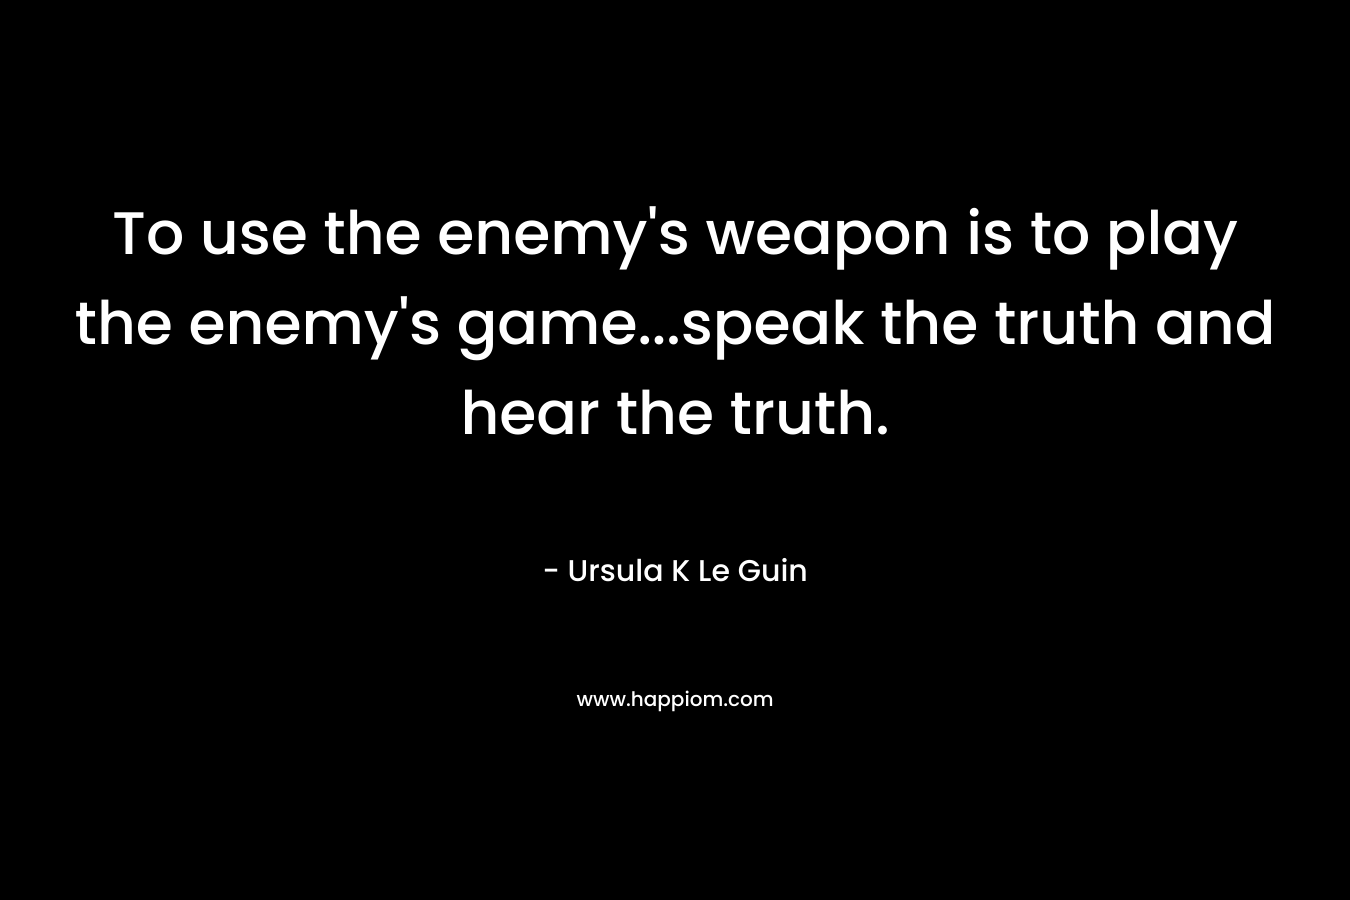 To use the enemy’s weapon is to play the enemy’s game…speak the truth and hear the truth. – Ursula K Le Guin